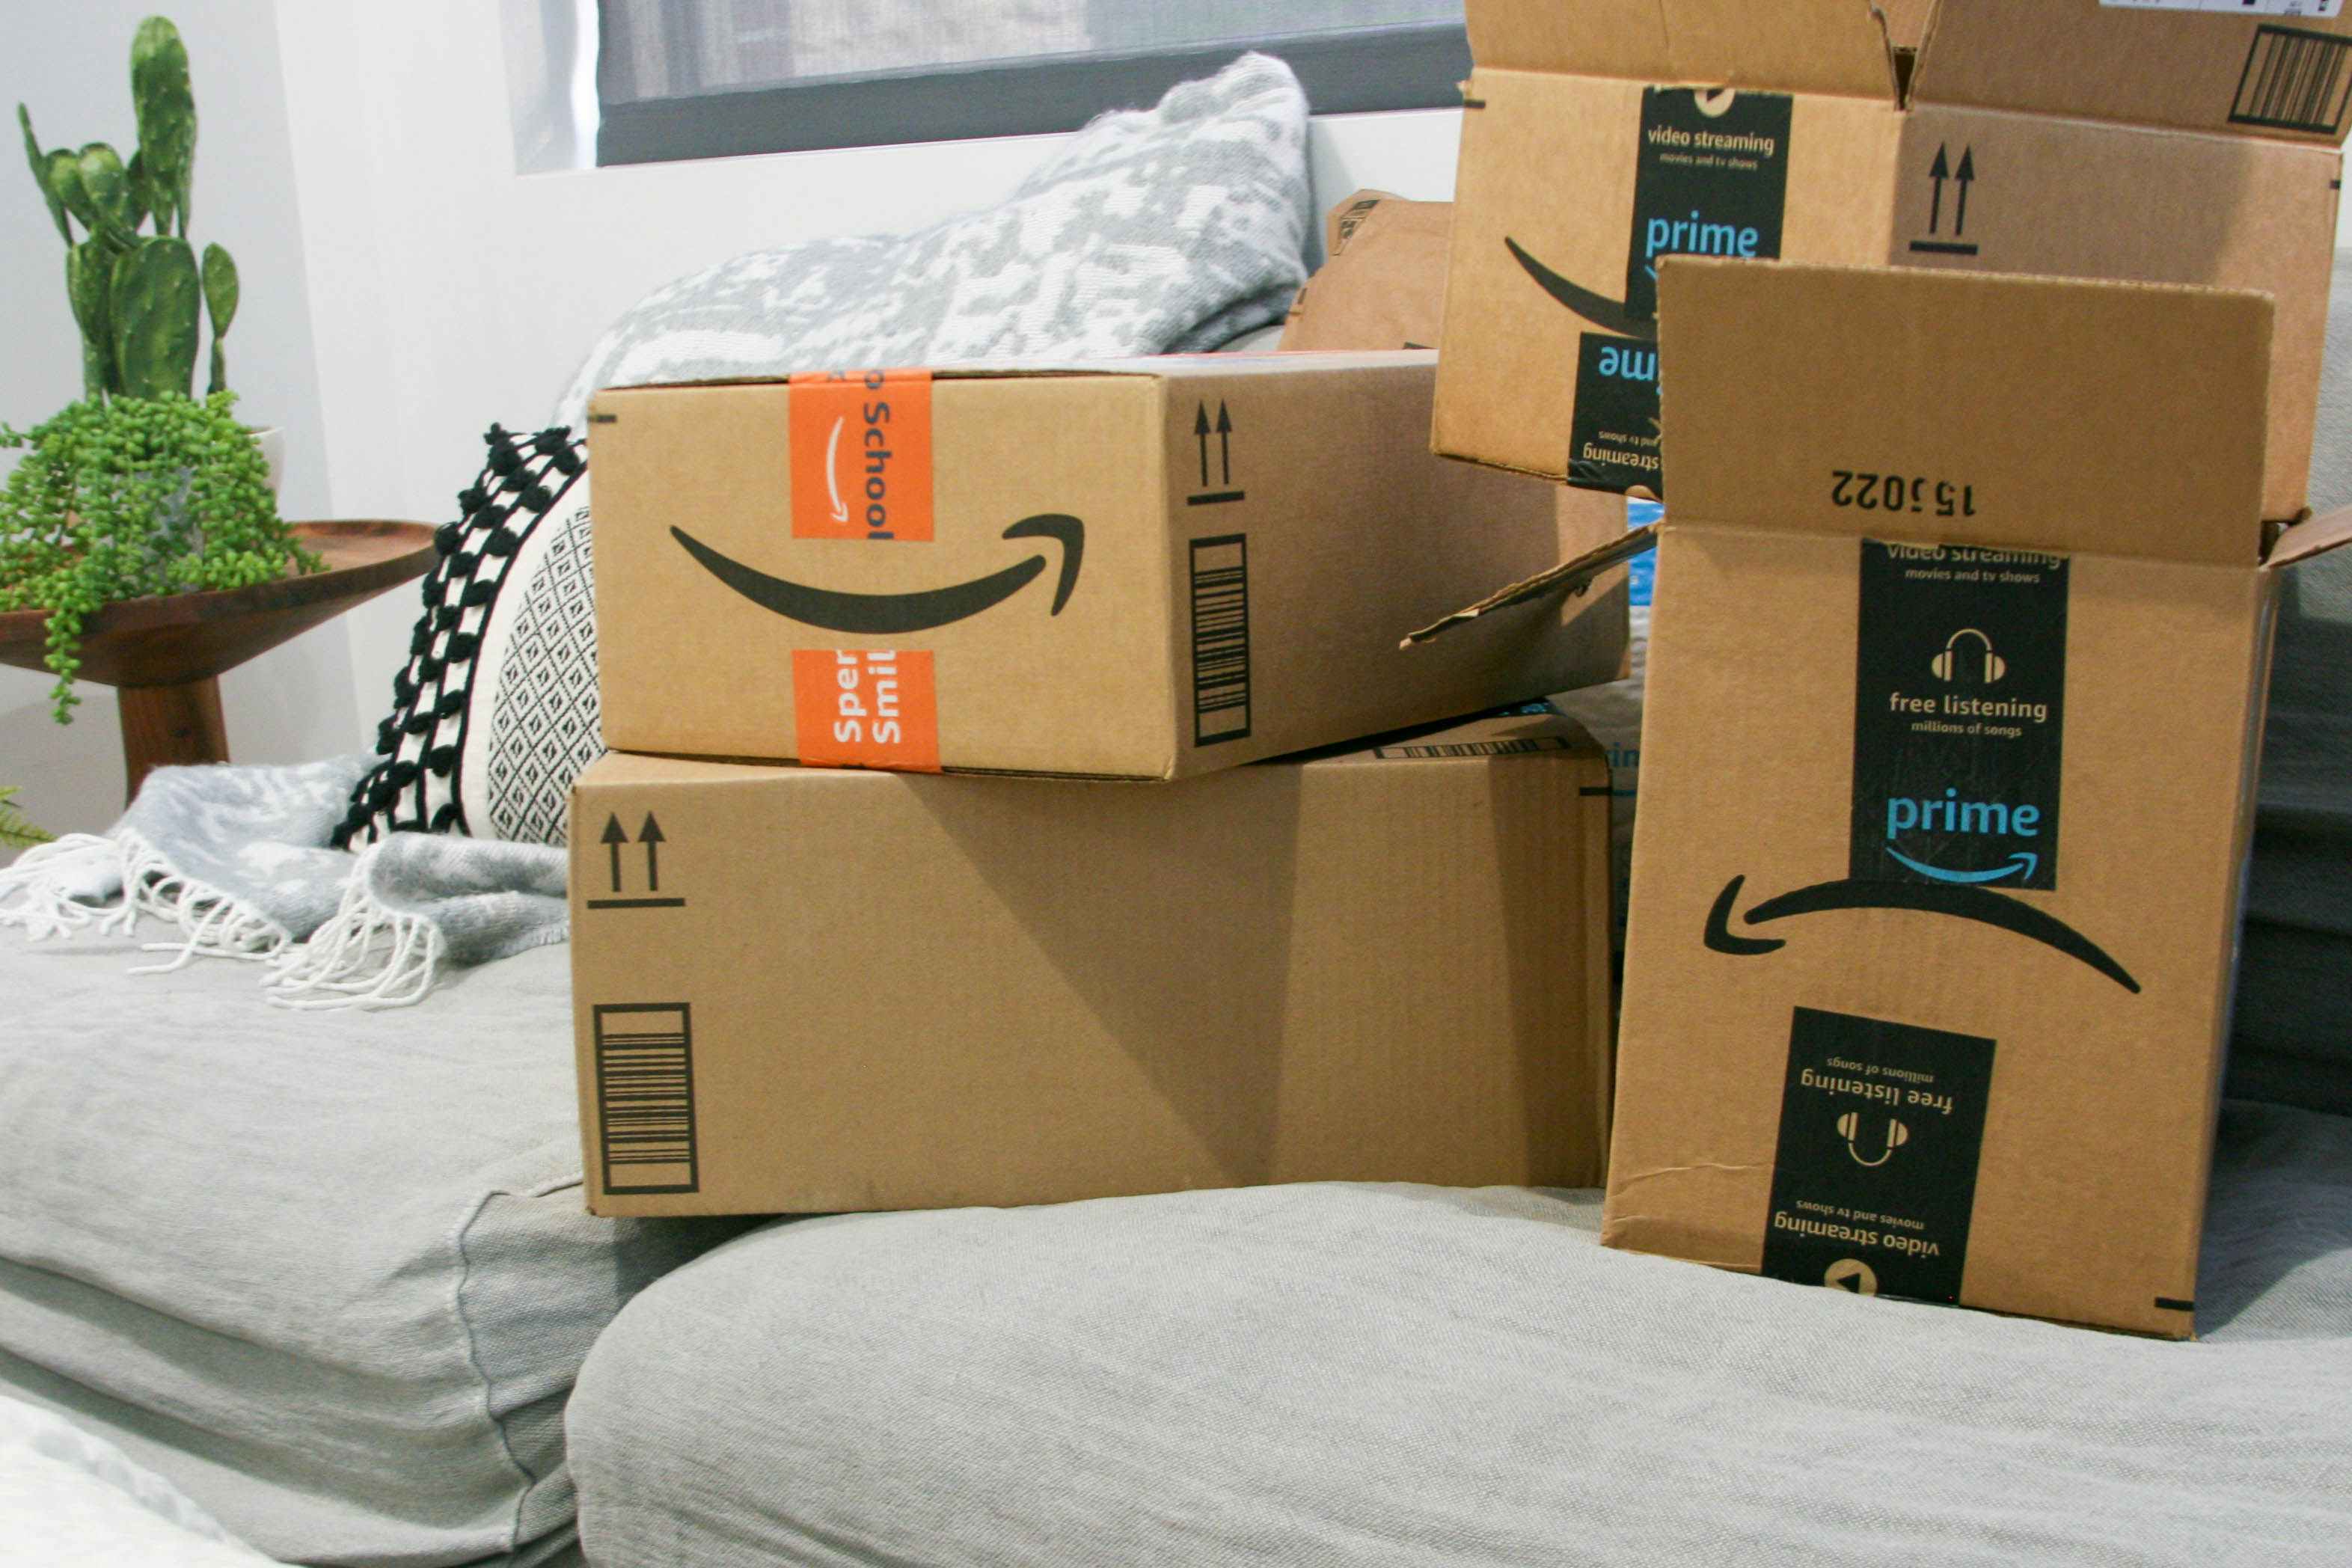 Amazon boxes on couch